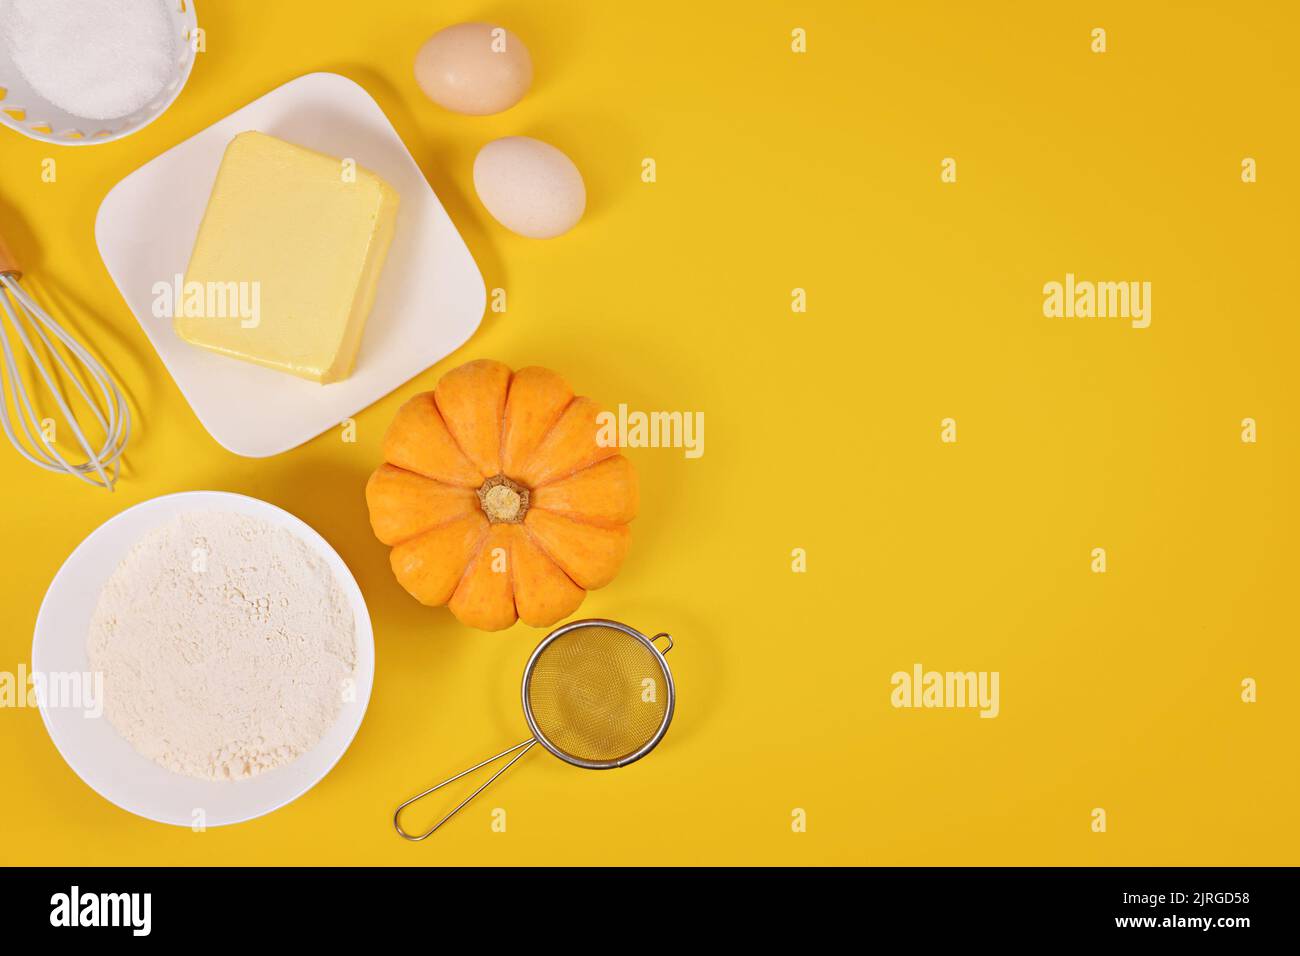 Pumpkin pie ingredients and baking tools on yellow background with copy space Stock Photo